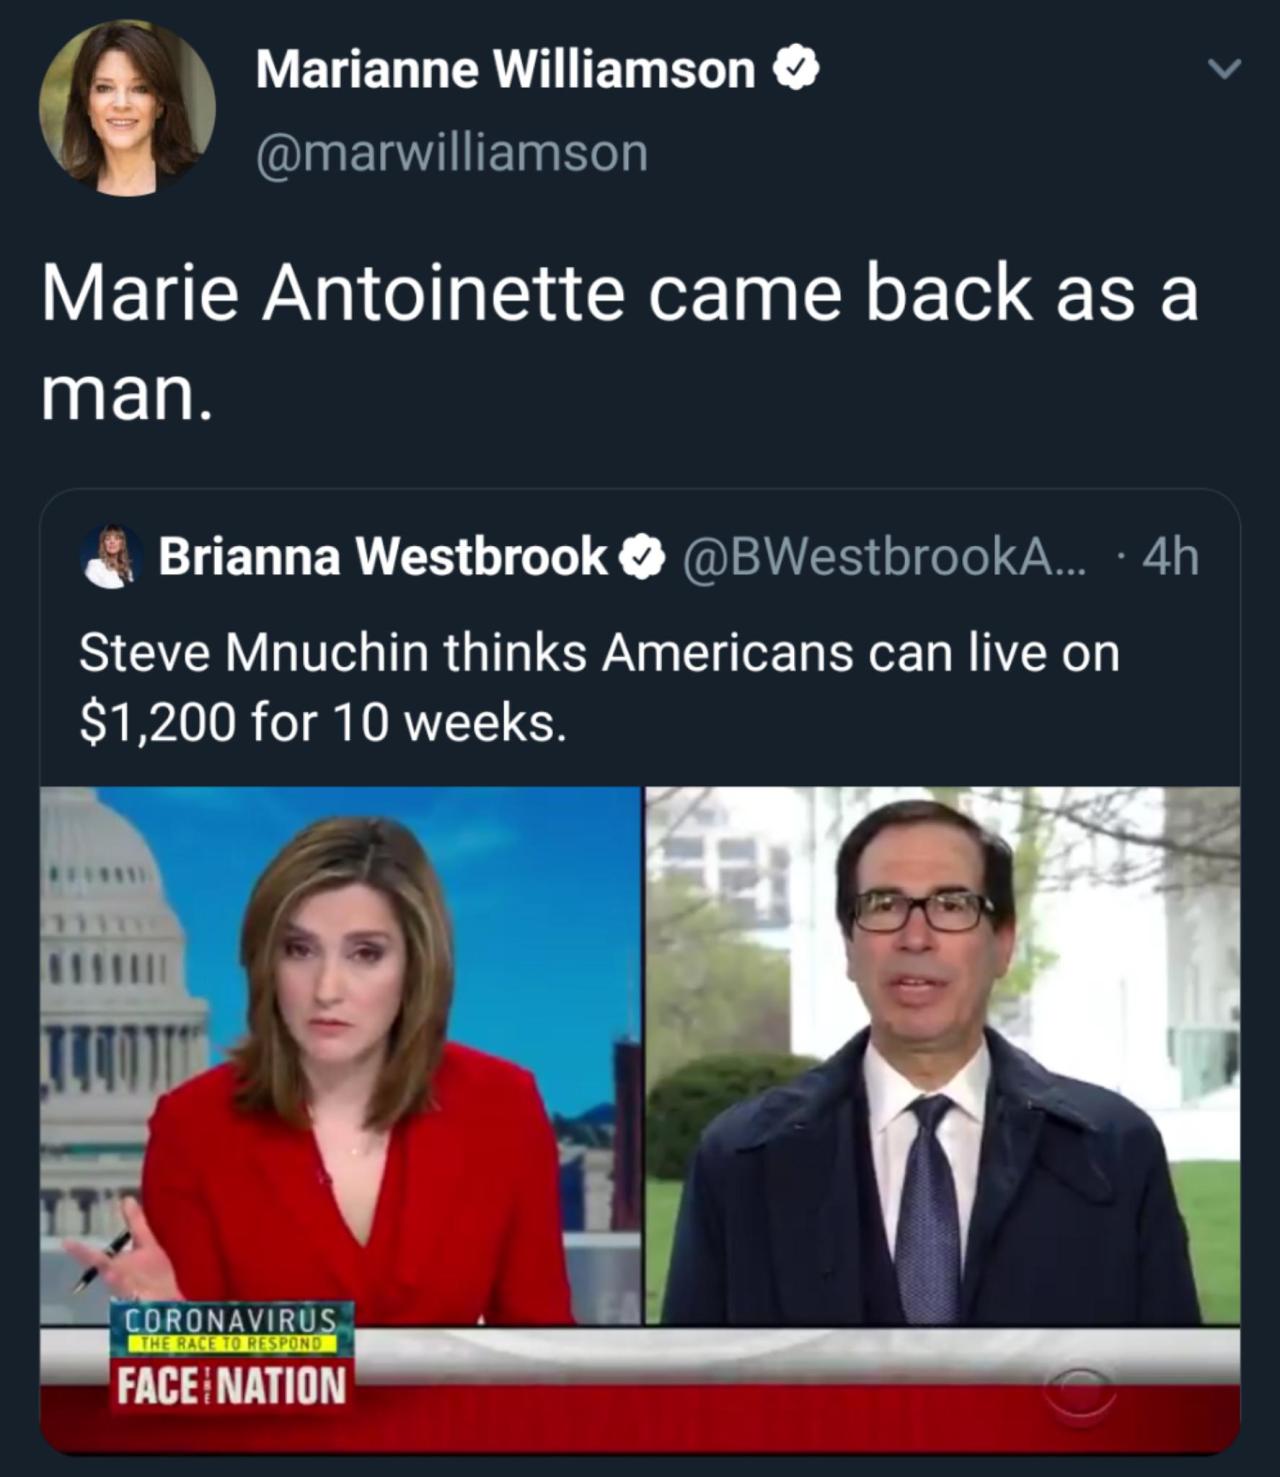 steve mnuchin 10 weeks - Marianne Williamson Marie Antoinette came back as a man. Brianna Westbrook ... 4h Steve Mnuchin thinks Americans can live on $1,200 for 10 weeks. 11 Coronavirus The Race To Respond Face Nation